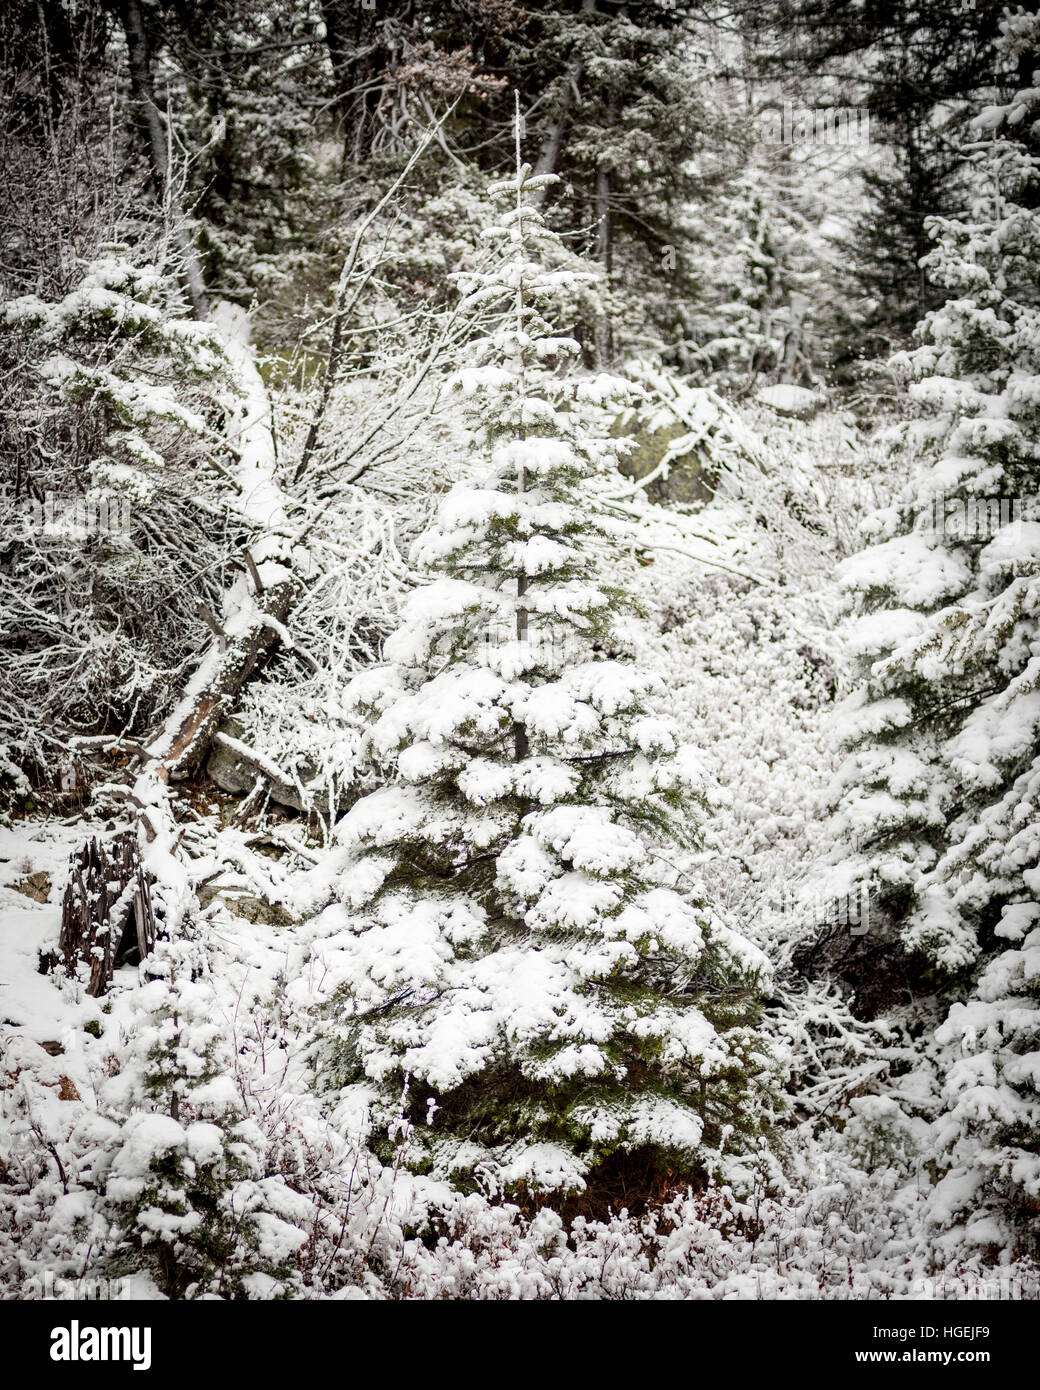 Christmas tree in a winter covered forest with lots of snow Stock Photo